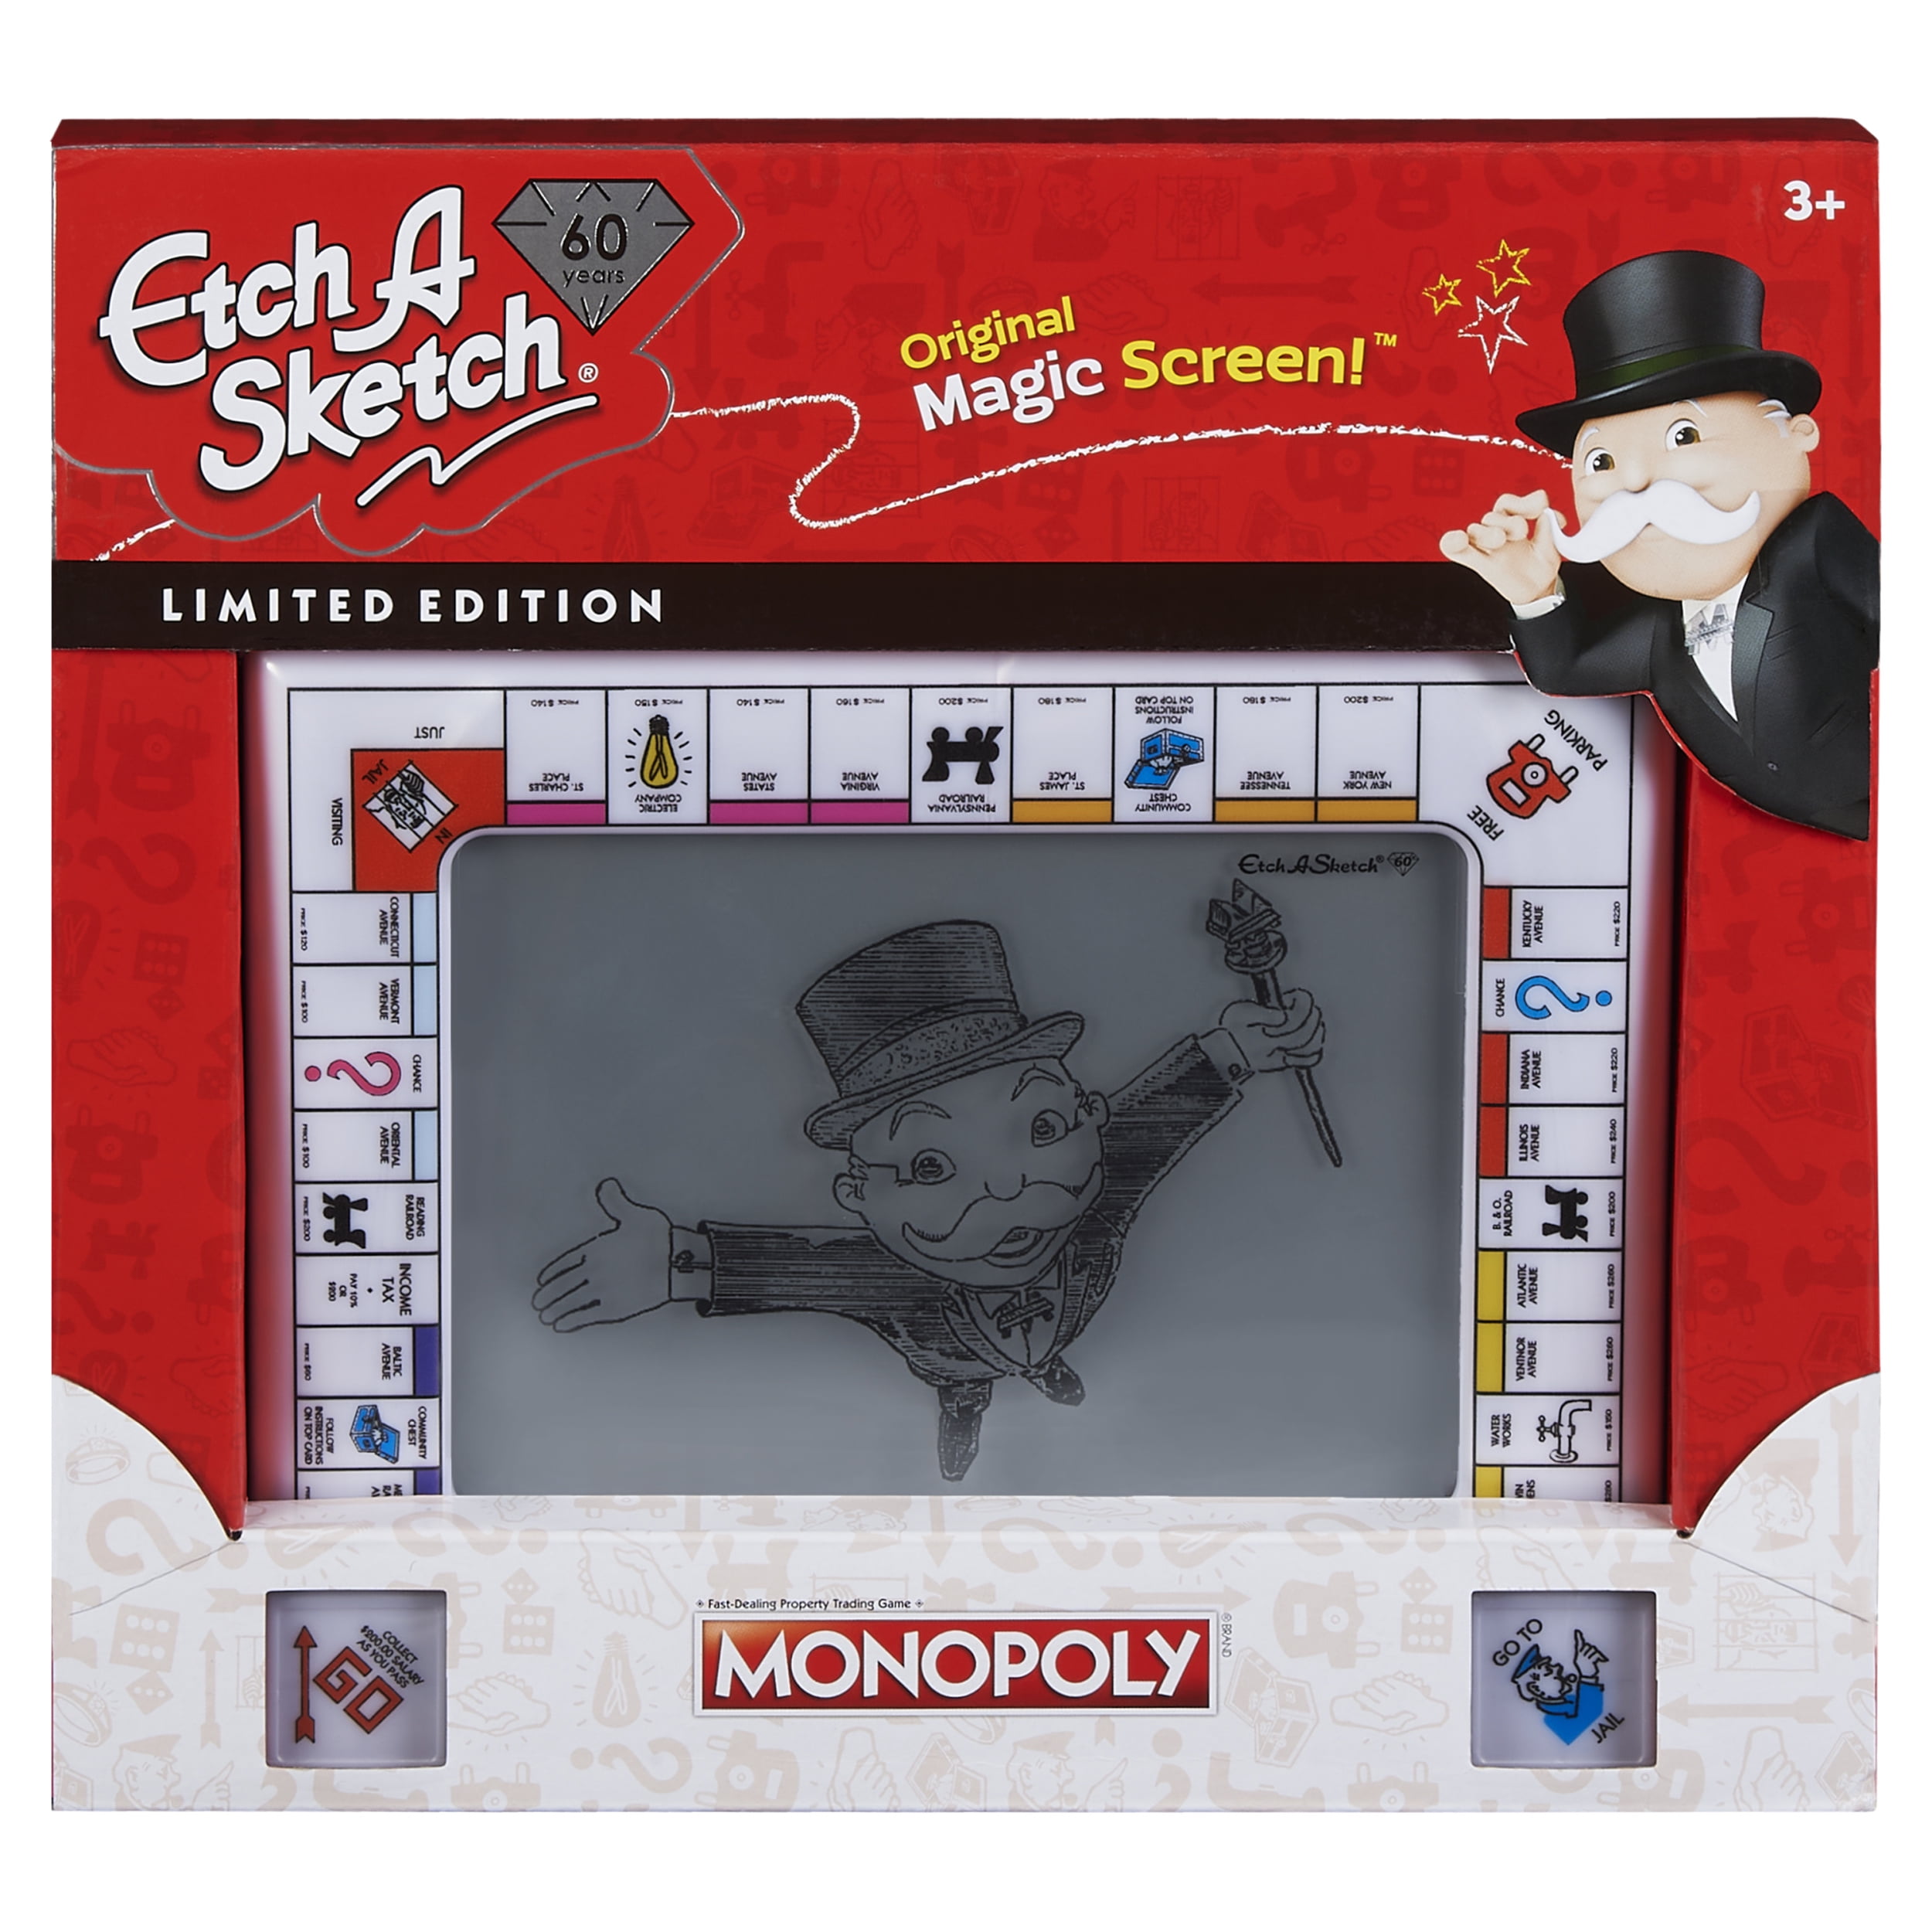 Etch A Sketch Classic Monopoly Limited-Edition Drawing Toy with Magic Screen